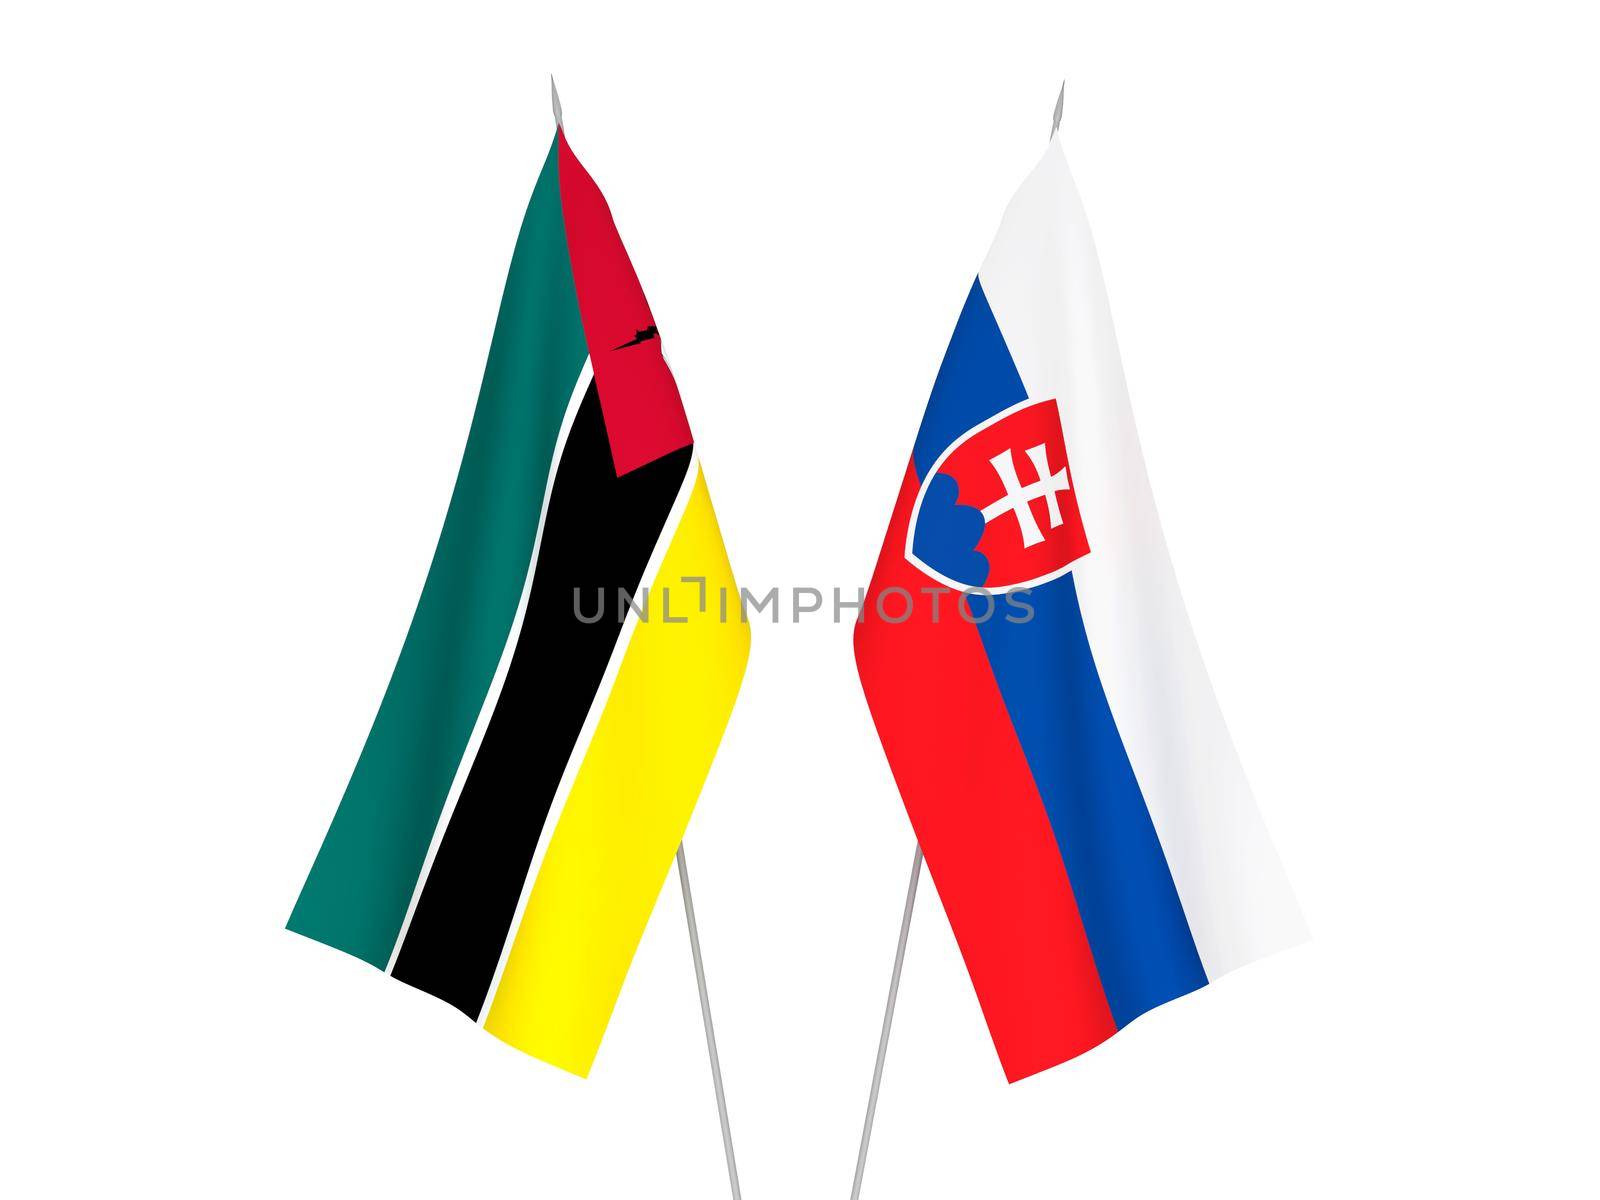 Republic of Mozambique and Slovakia flags by epic33